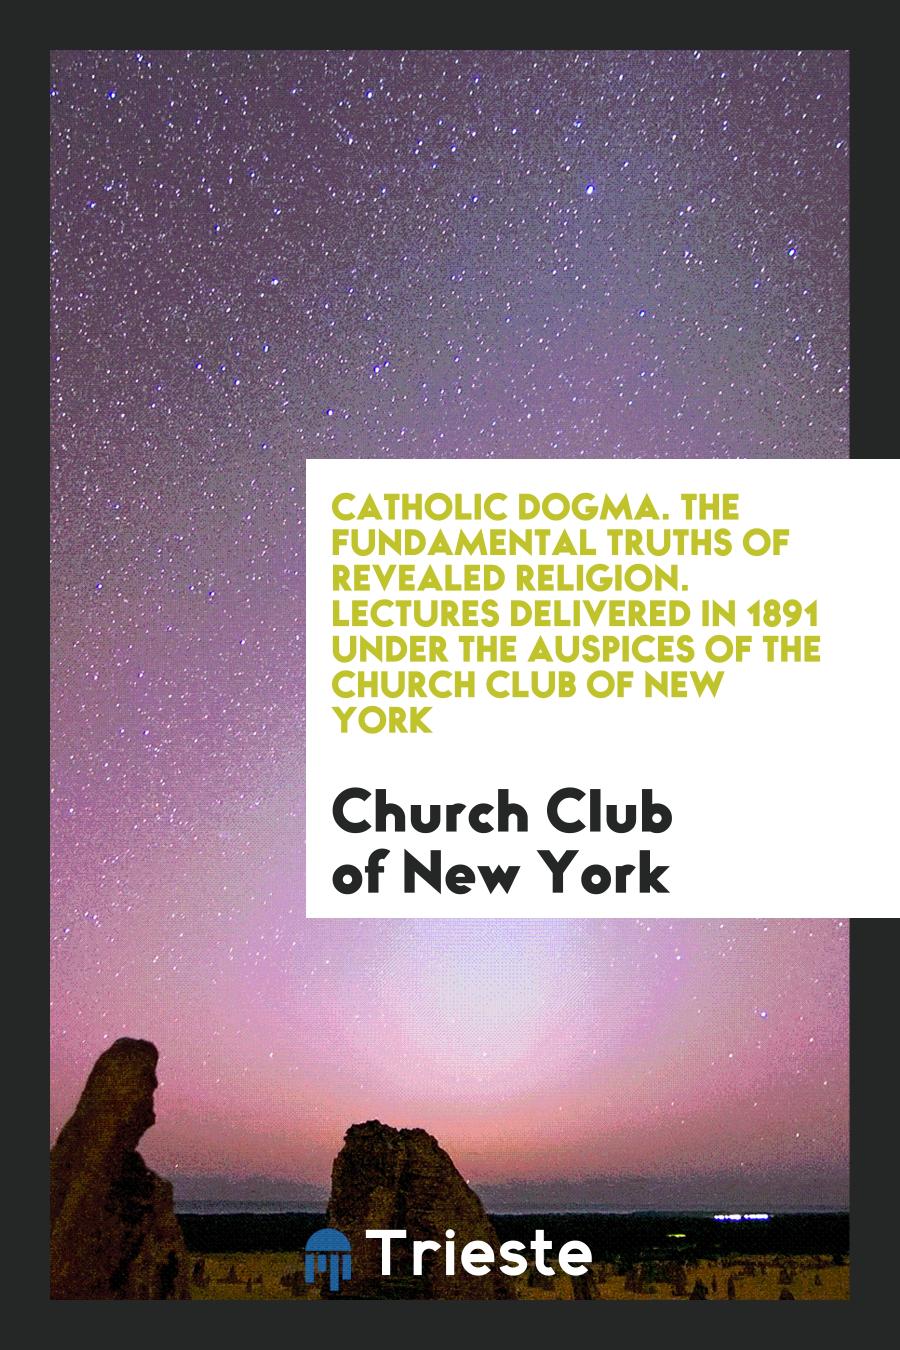 Catholic Dogma. The Fundamental Truths of Revealed Religion. Lectures Delivered in 1891 under the Auspices of the Church Club of New York